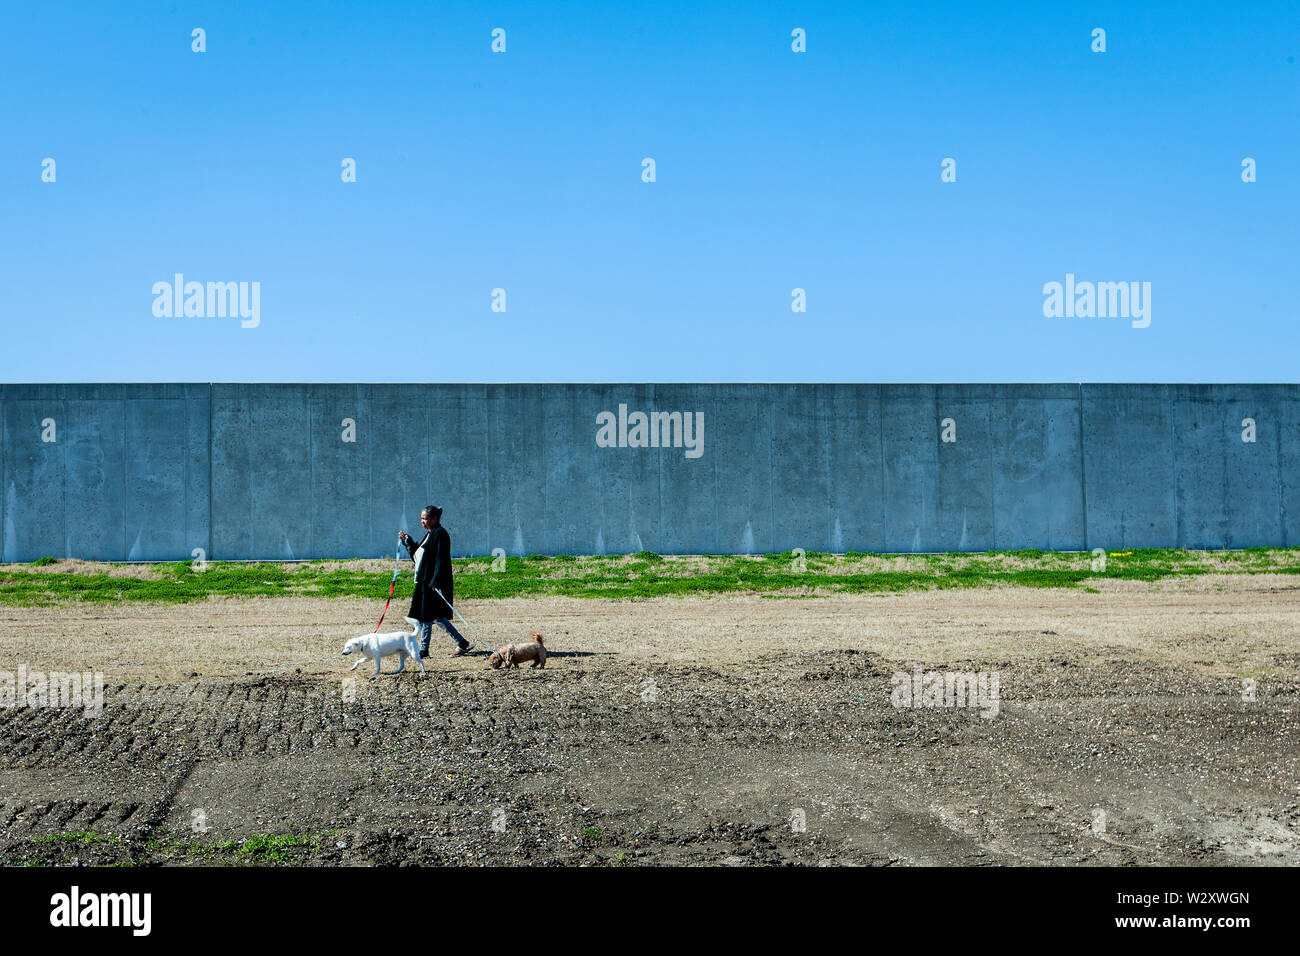 A woman walks a dog along the new flood protection on the restored dikes in the Lower Ninth Ward neighborhood.  The New Orleans neighborhood Lower Ninth Ward was devastated by the Hurricane Katrina and the aftermath. Five years after, the neighborhood is the biggest tourist attraction in the area. Stock Photo